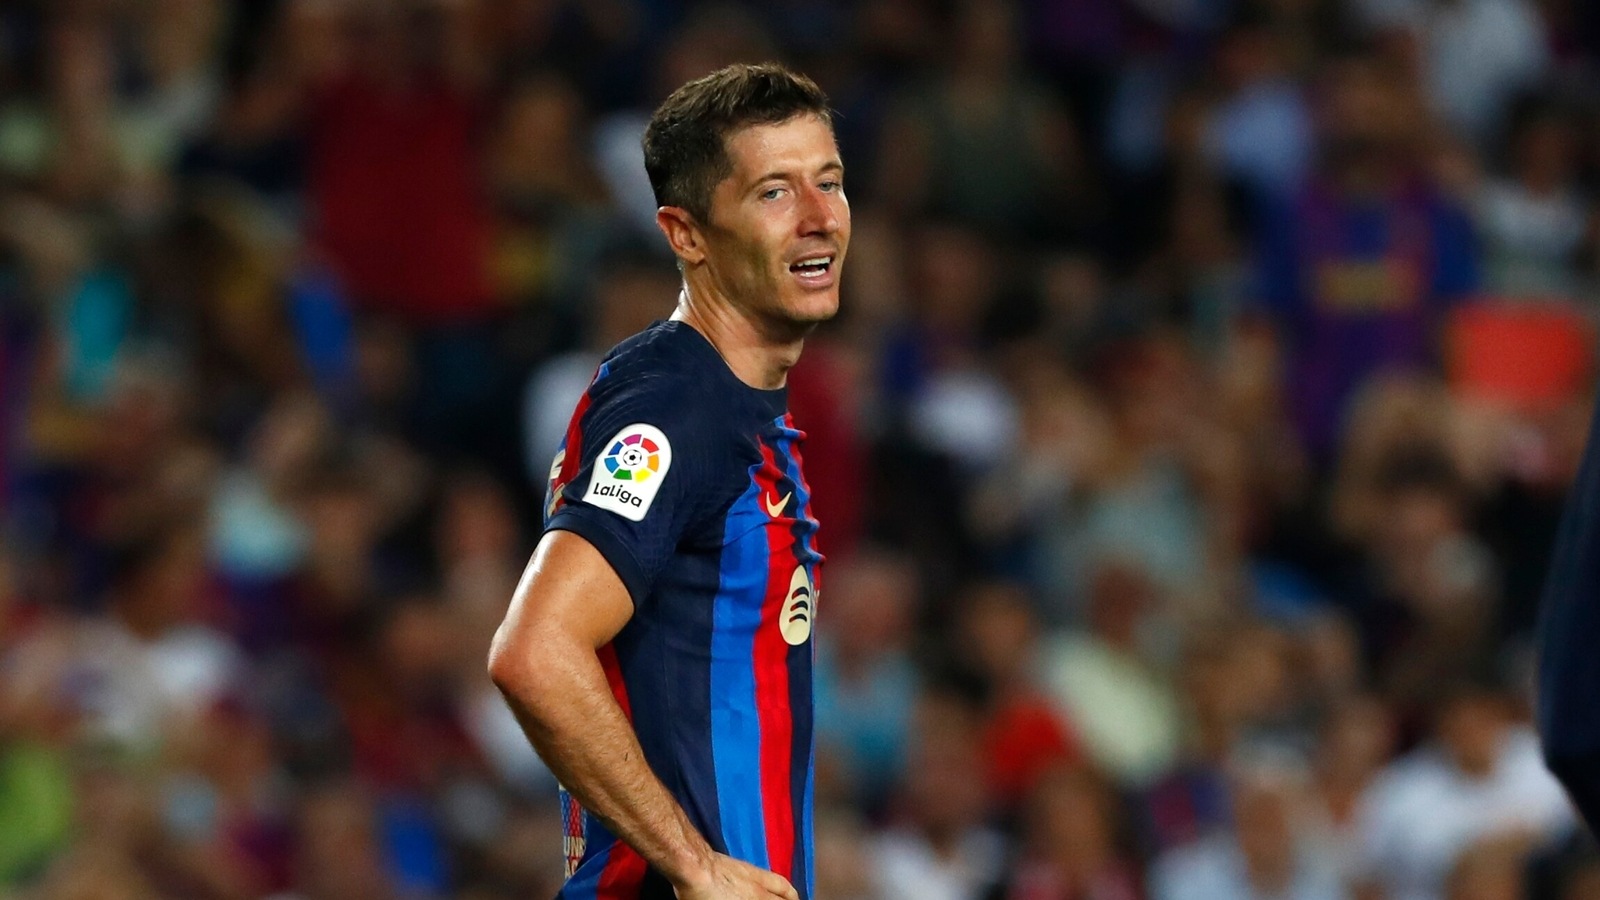 lewandowski-s-usd70-000-watch-snatched-from-his-arm-before-barcelona-practice